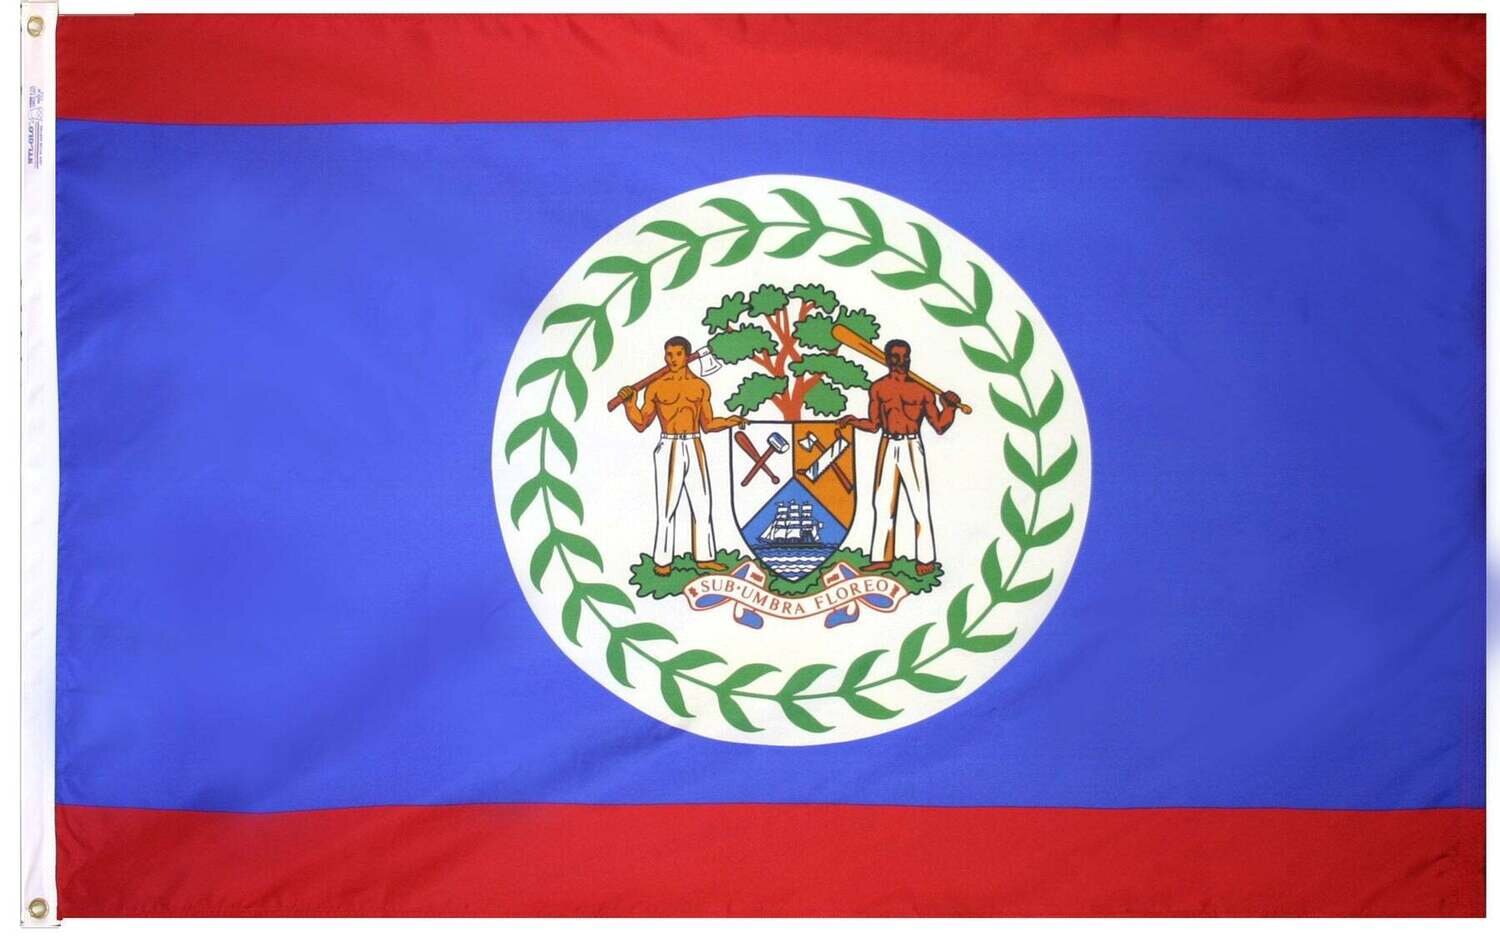 Belize Flag 3x5 ft. Nylon SolarGuard Nyl-Glo 100% Made in USA to Official United Nations Design Specifications.